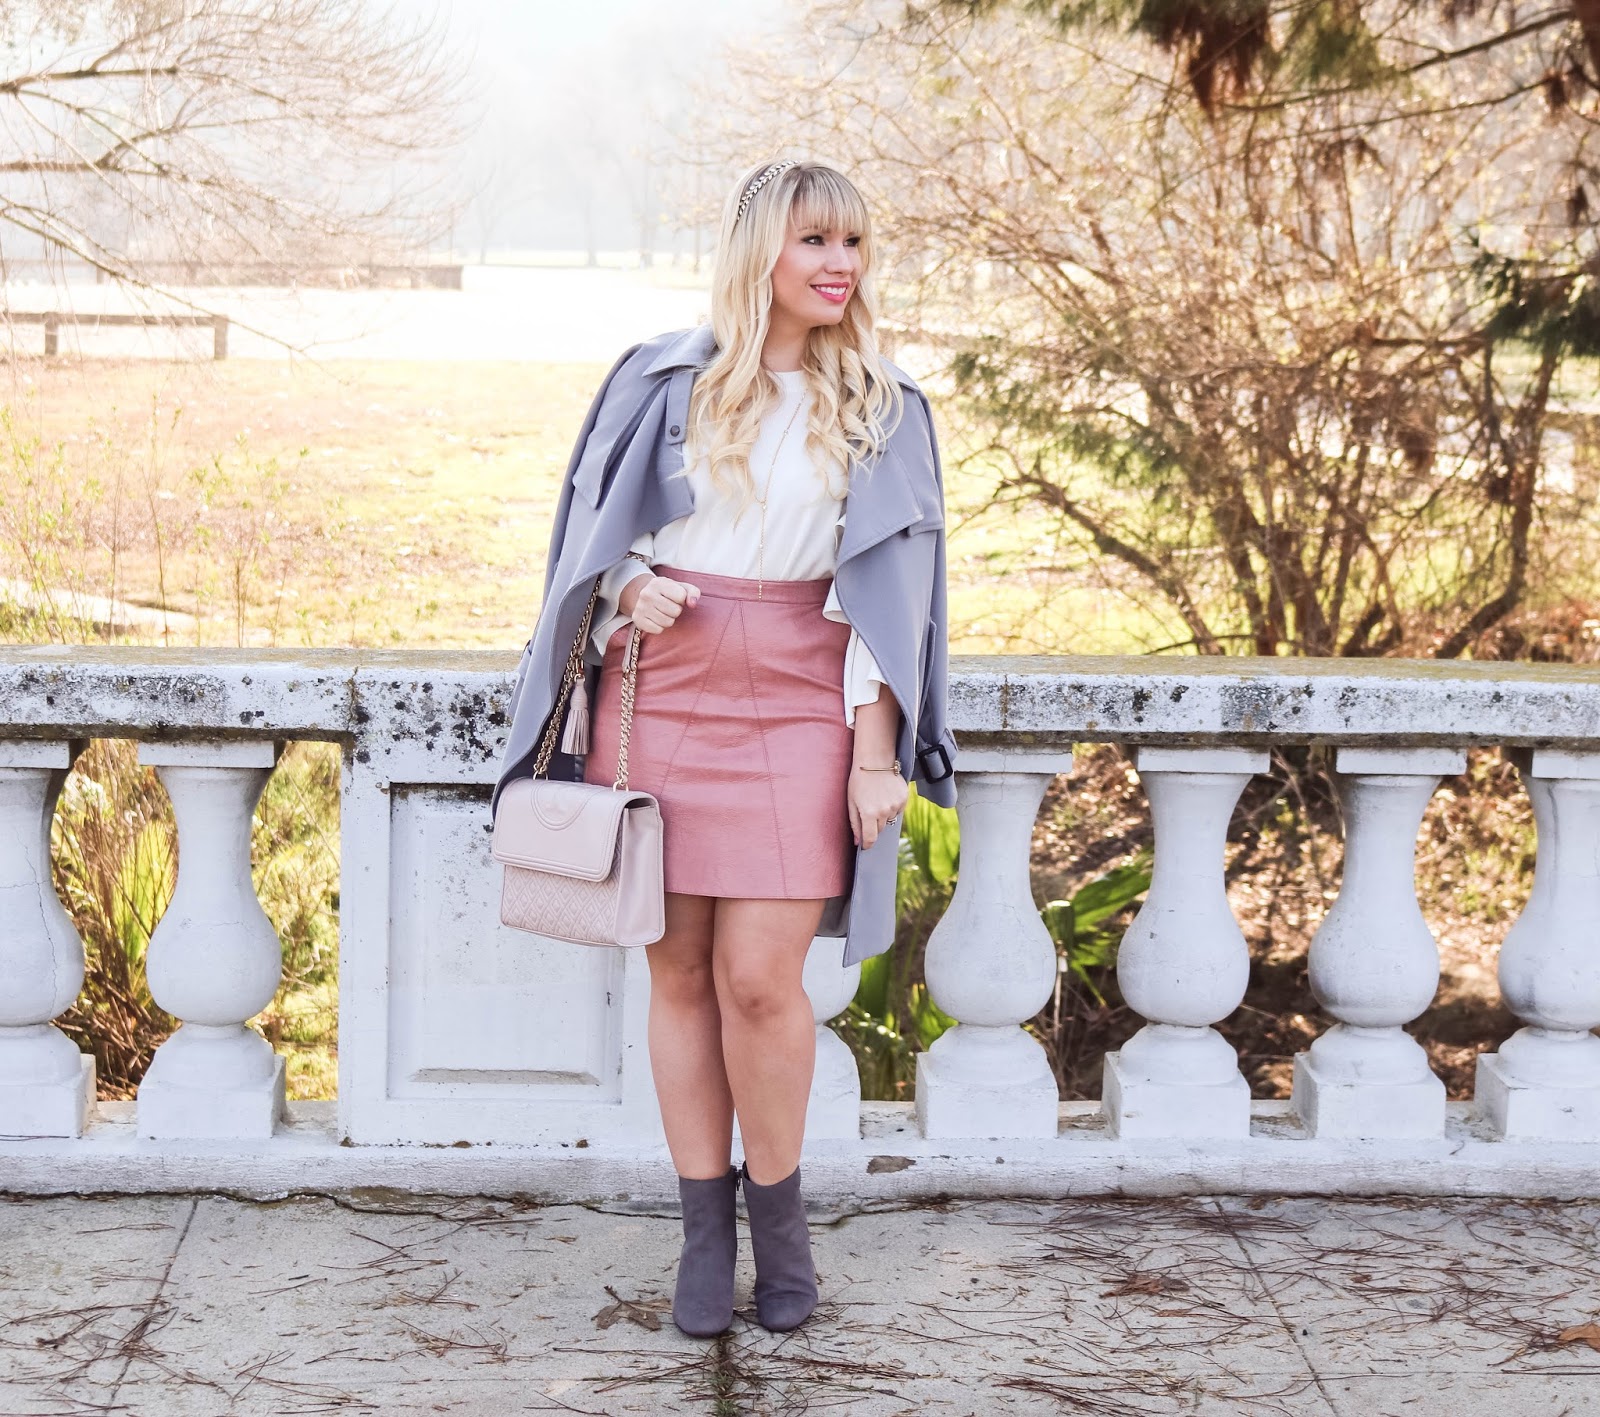 Feminine fashion blogger Lizzie in Lace shares a Pink Faux Leather Skirt Outfit